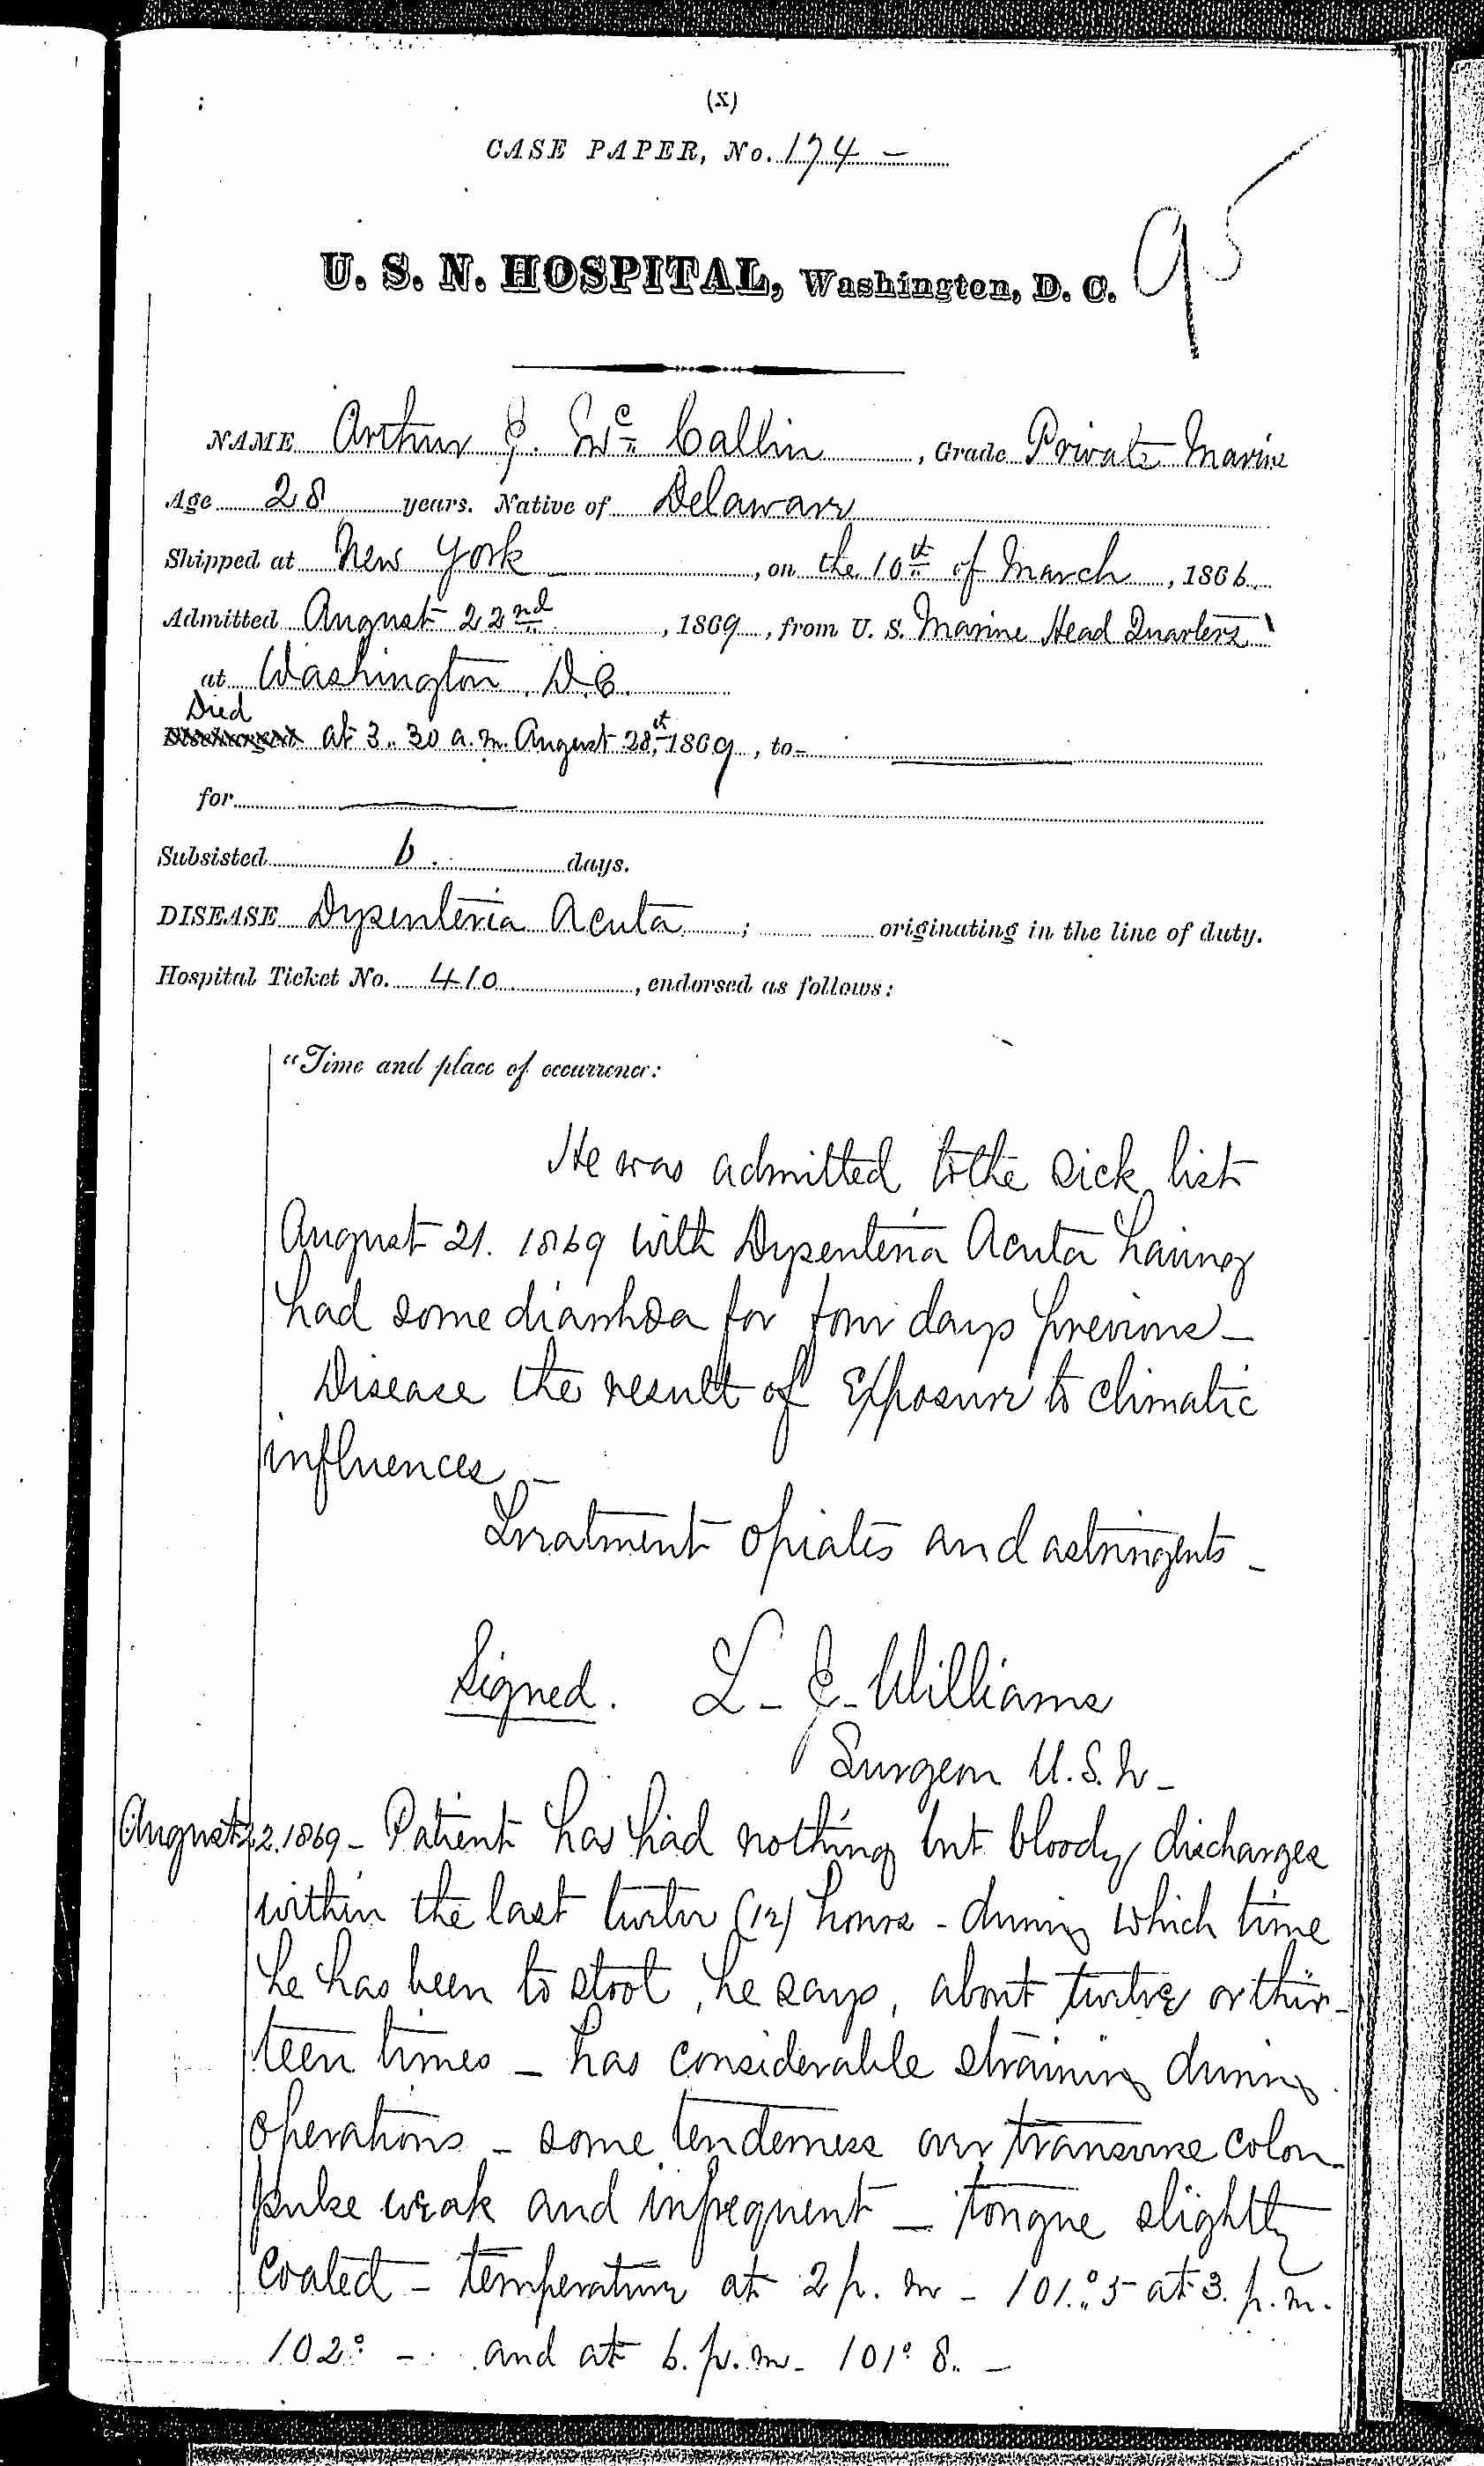 Entry for Arthur J. McCallan (page 1 of 5) in the log Hospital Tickets and Case Papers - Naval Hospital - Washington, D.C. - 1868-69